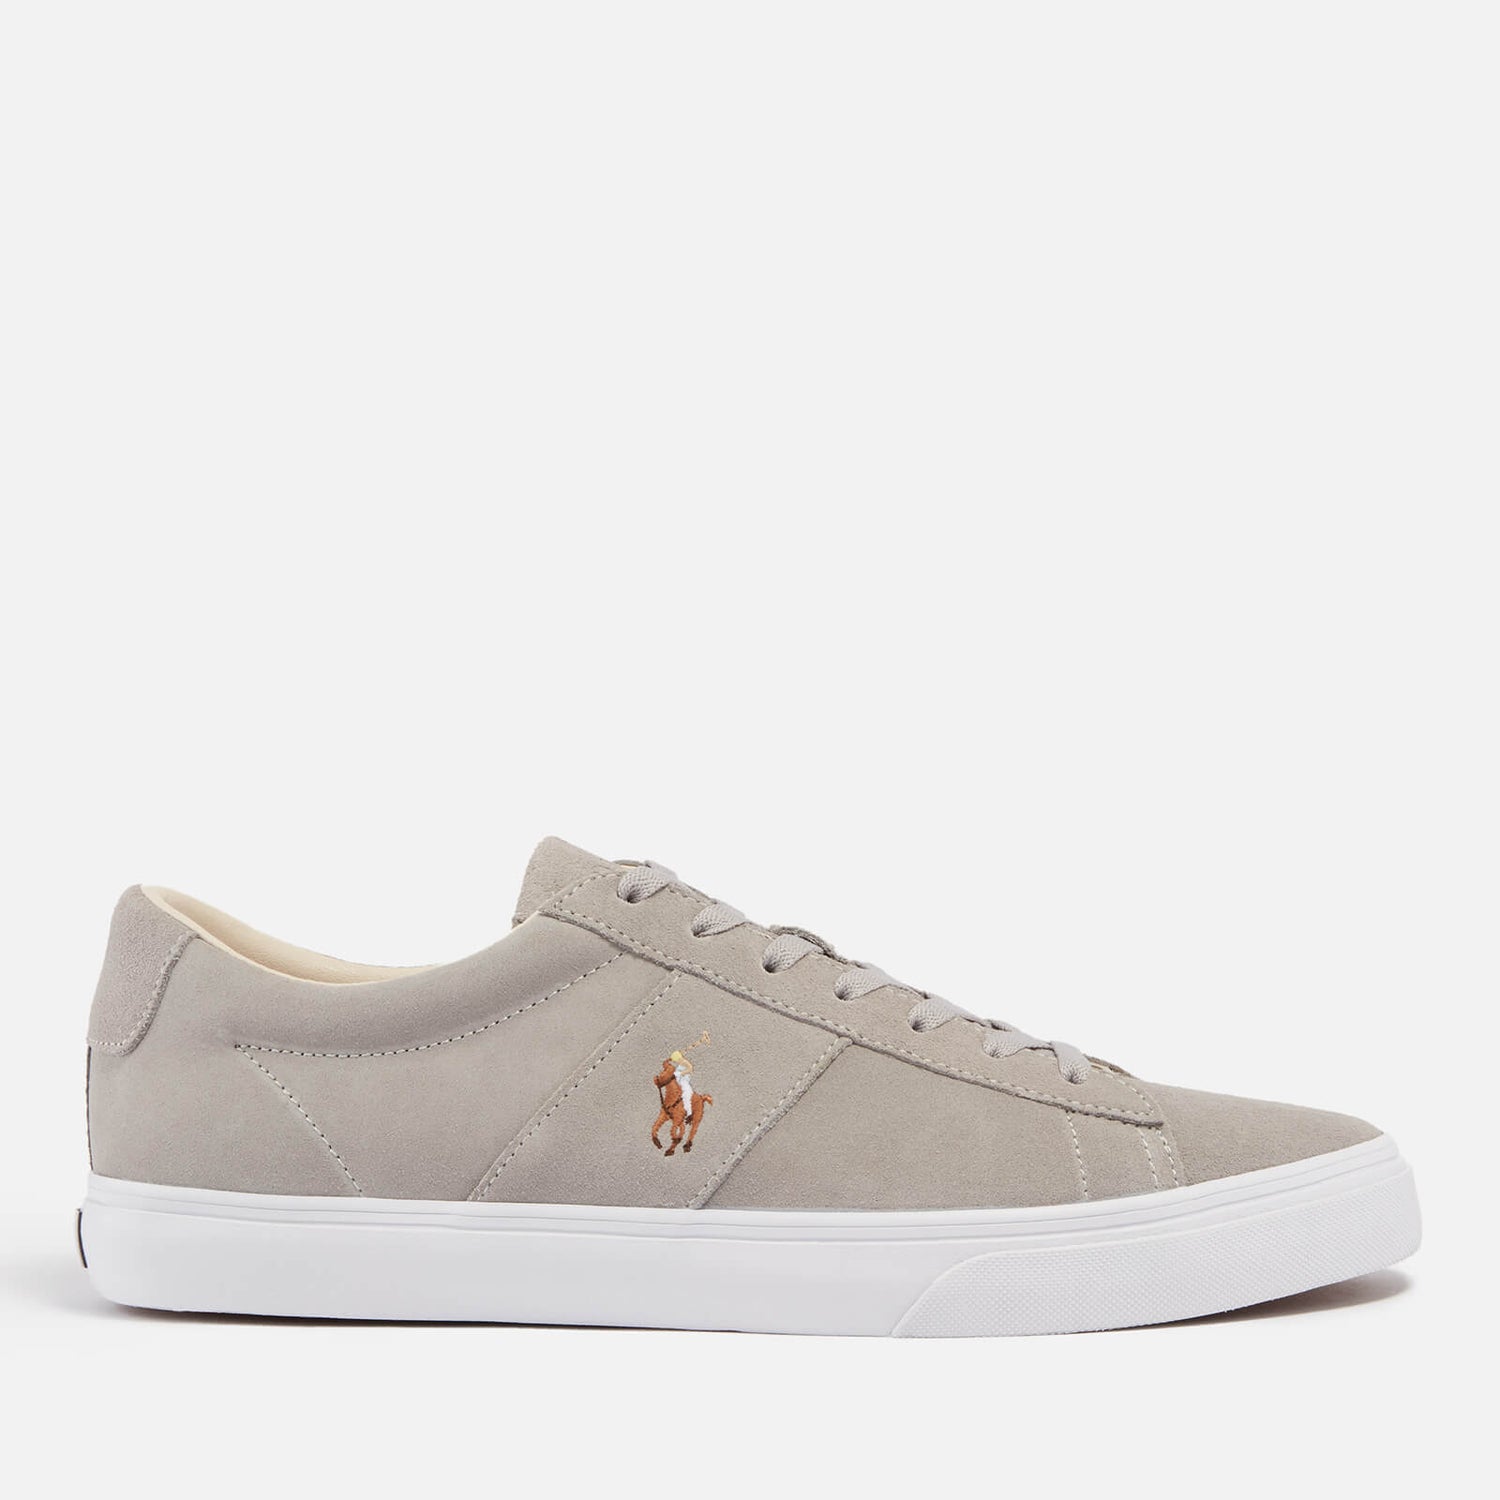 Polo Ralph Lauren Sayer Suede Low Top Trainers